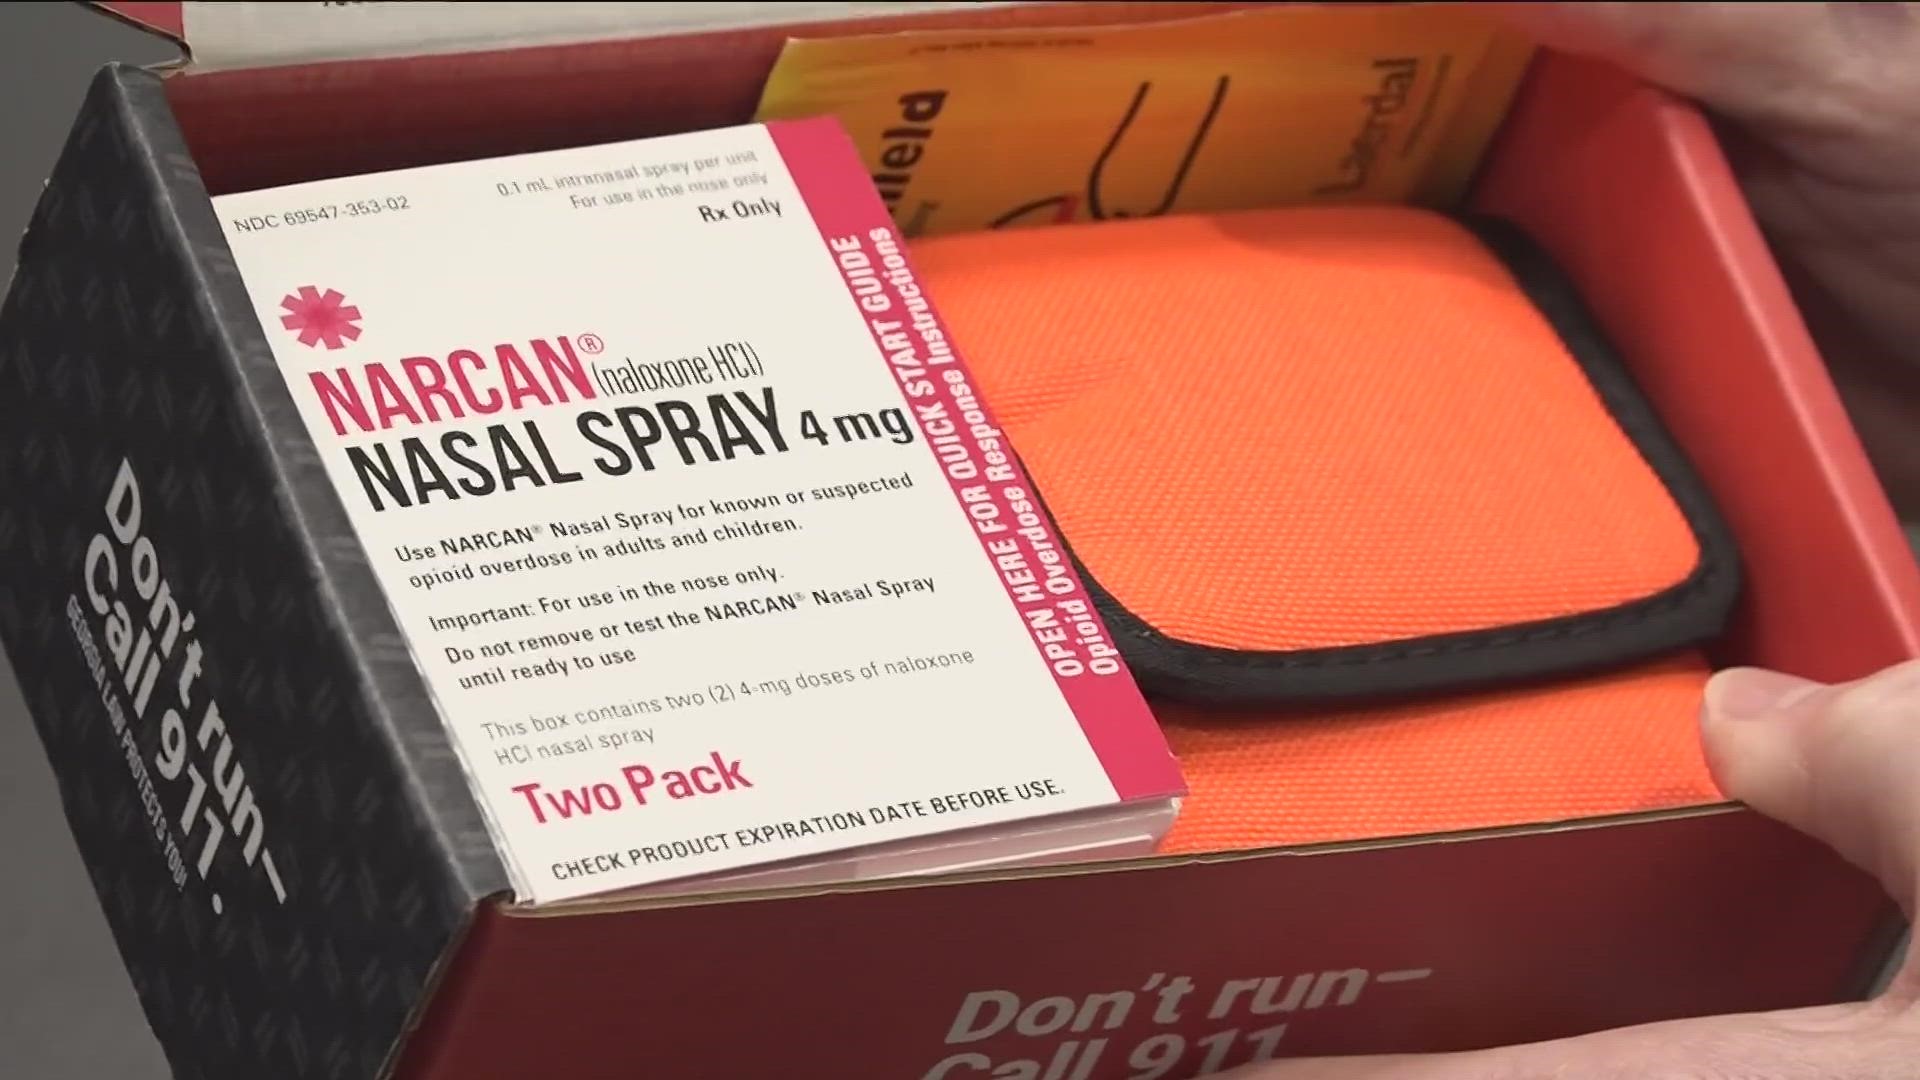 The health district has more than 5,000 free emergency Narcan kits available for anyone 18 and older.